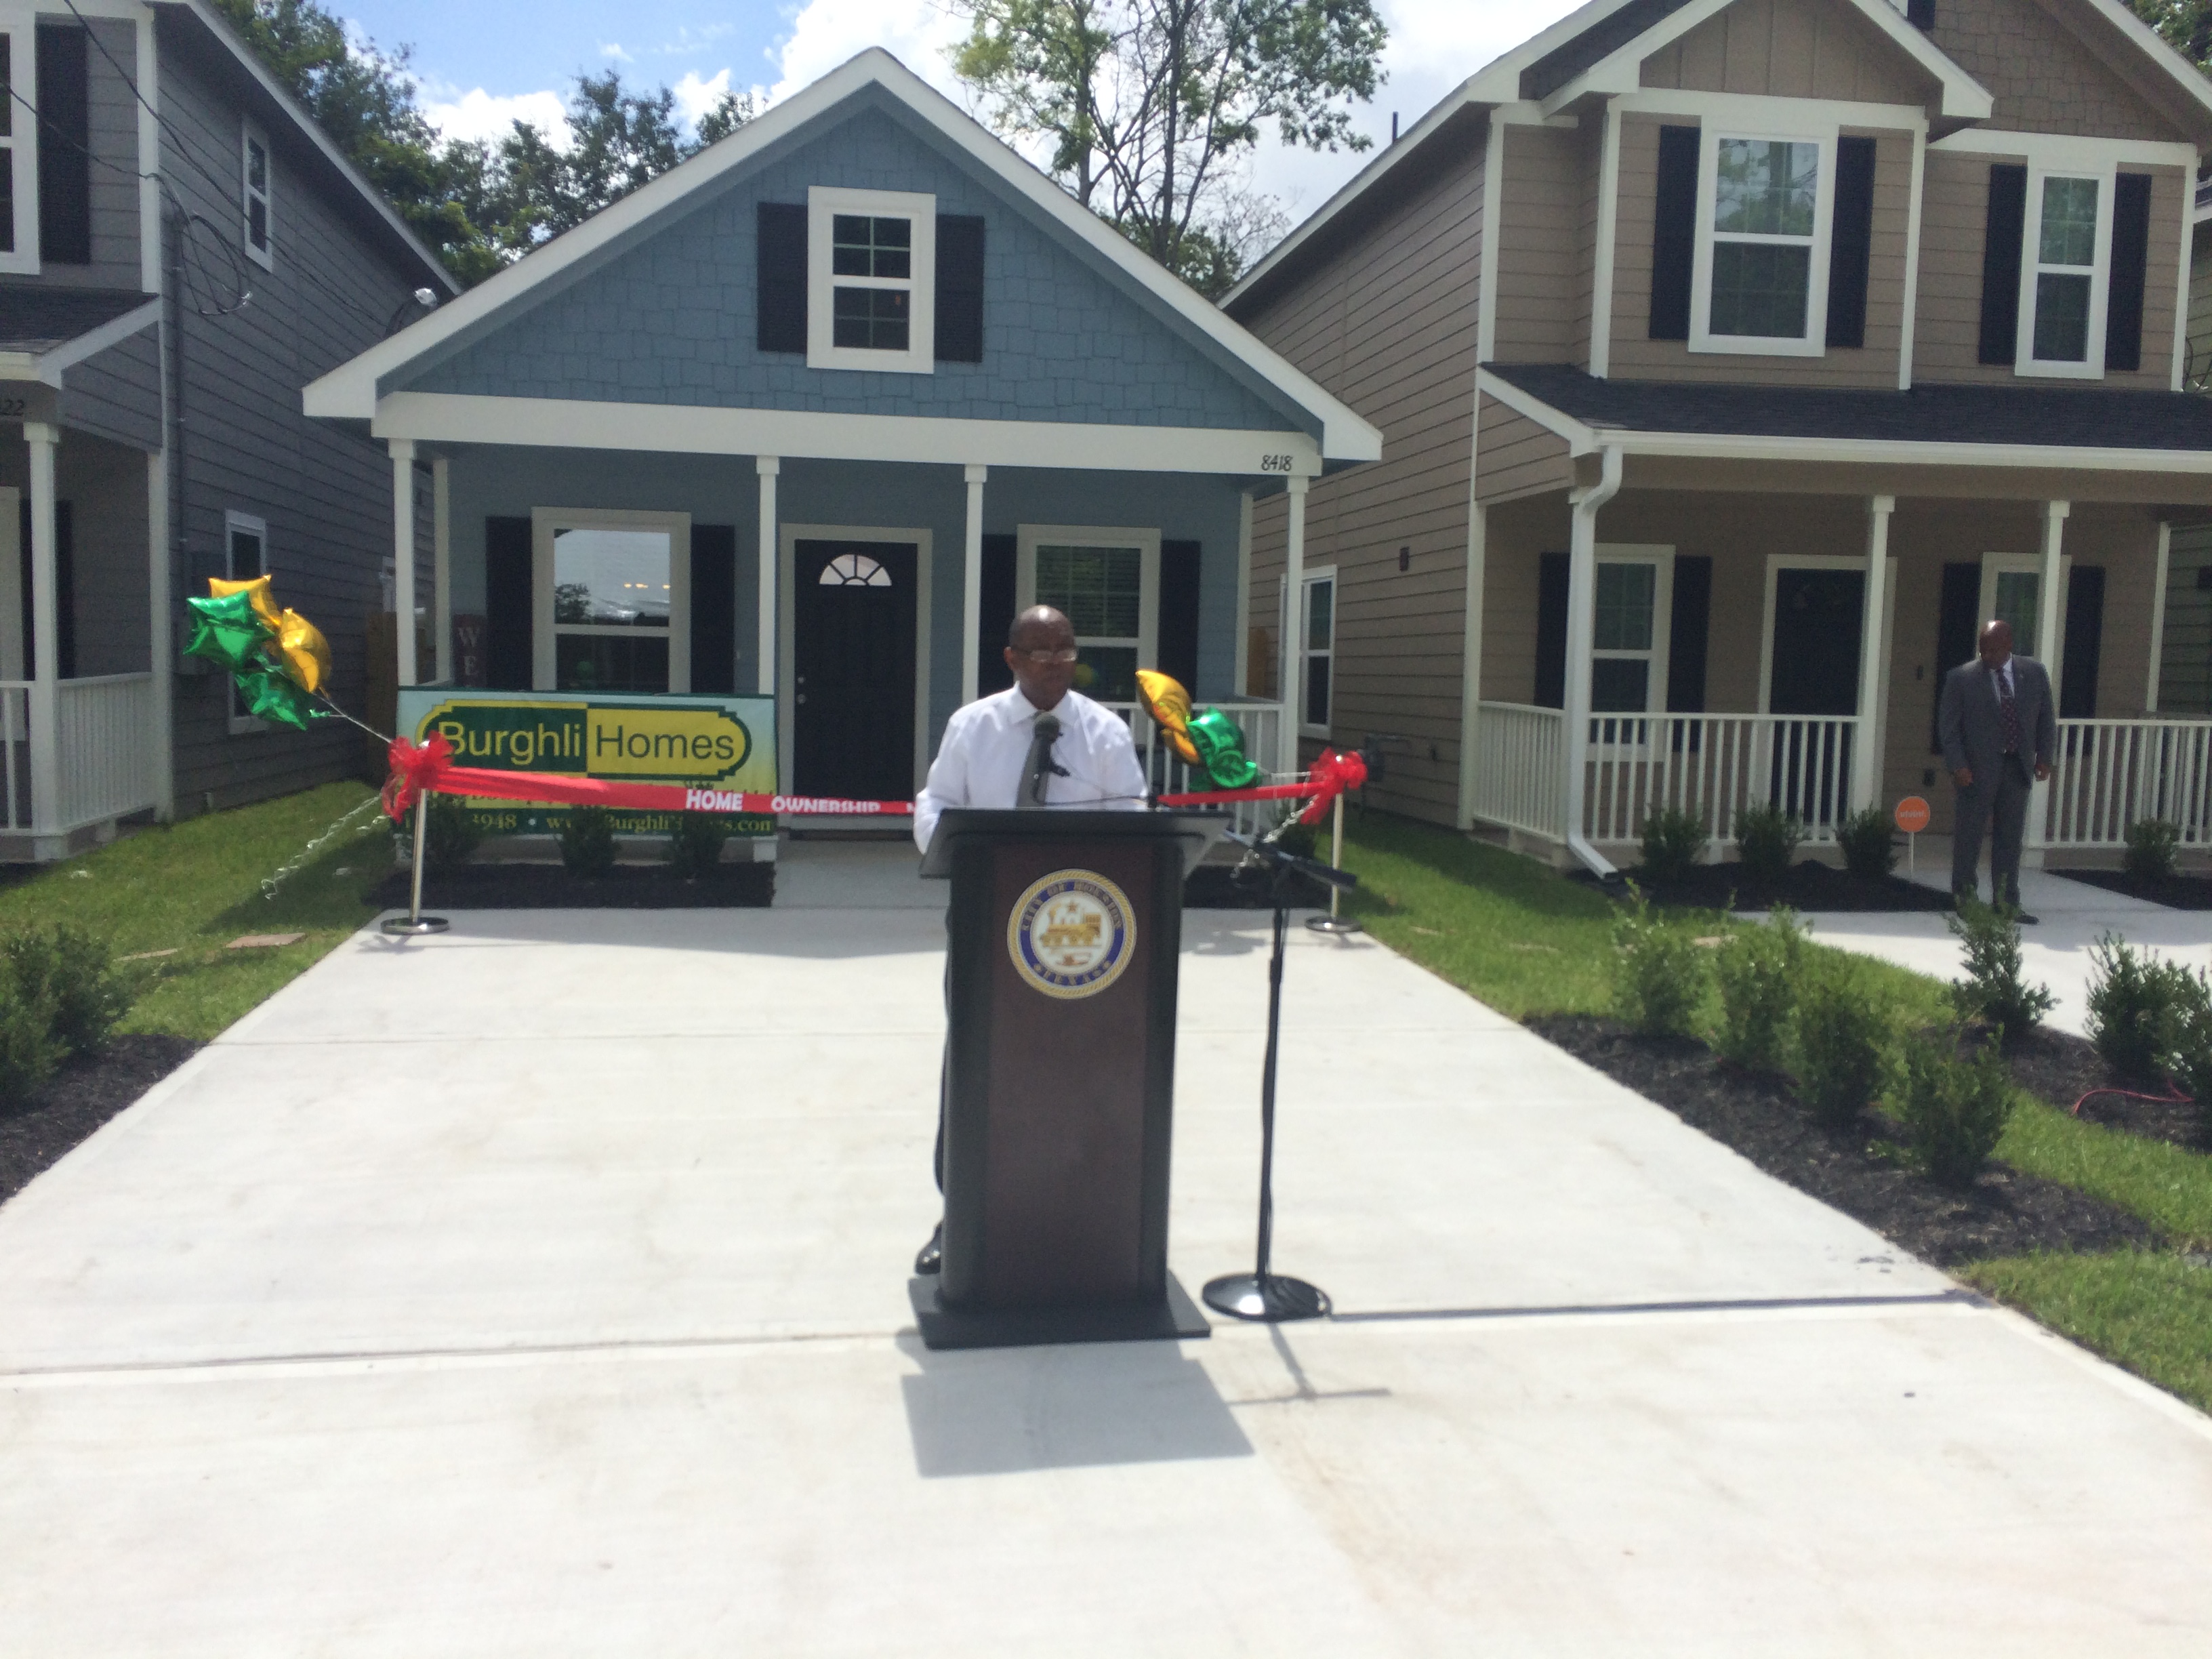 Acres Homes Native Mayor Sylvester Turner Knows His Roots